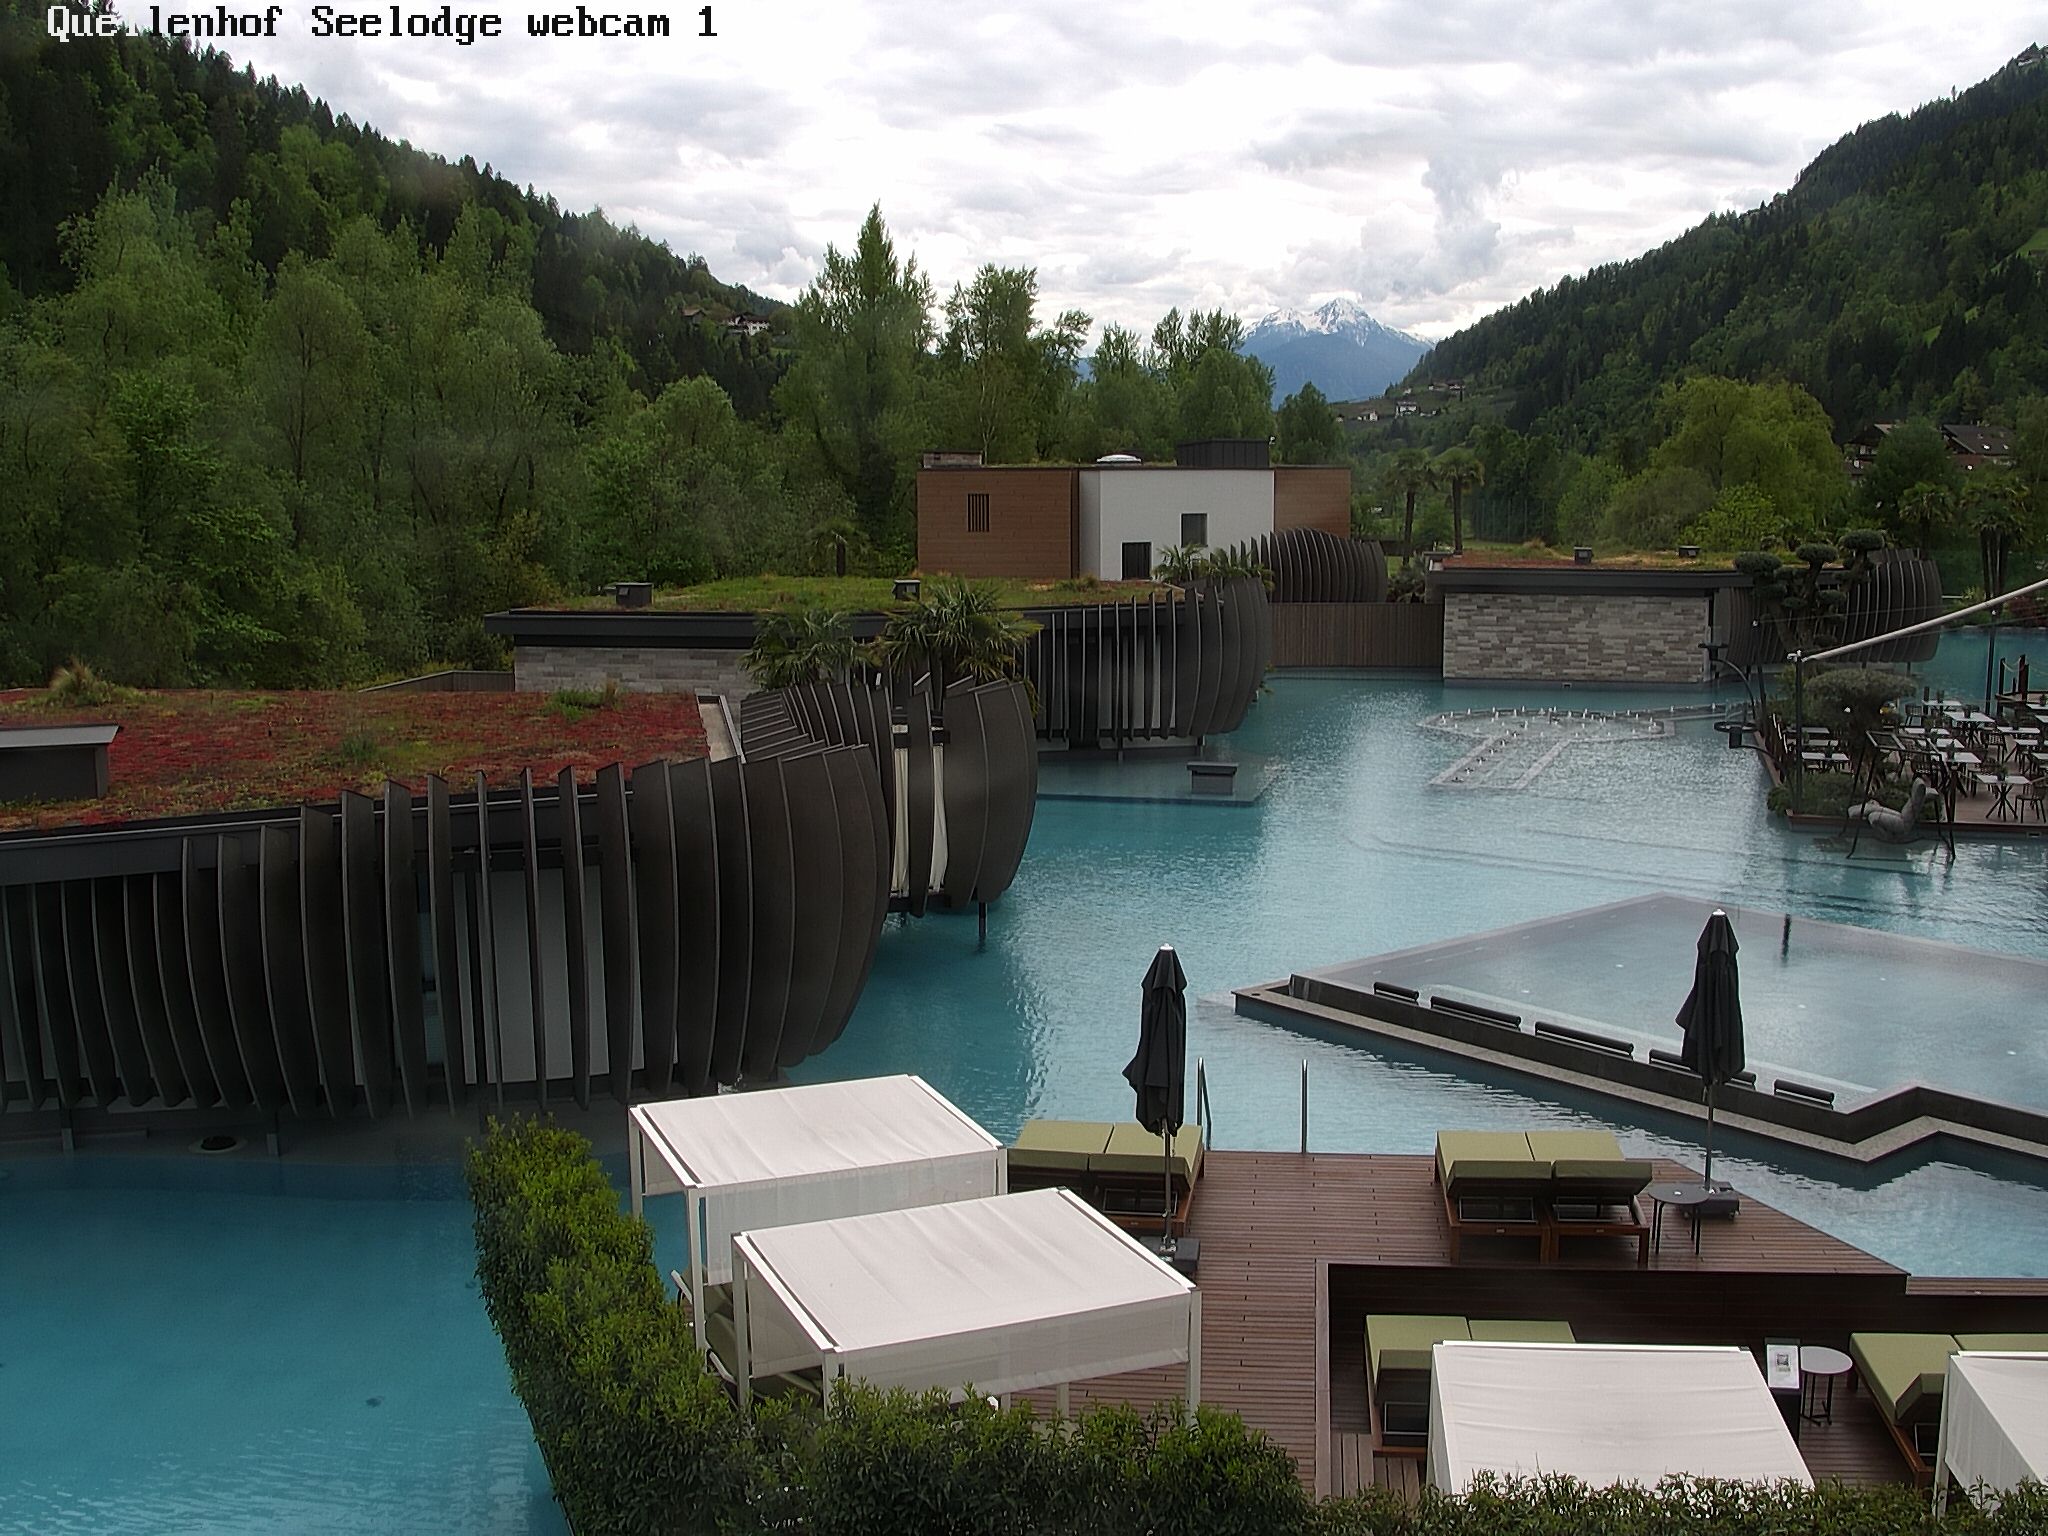 Live from the Quellenhof See Lodge